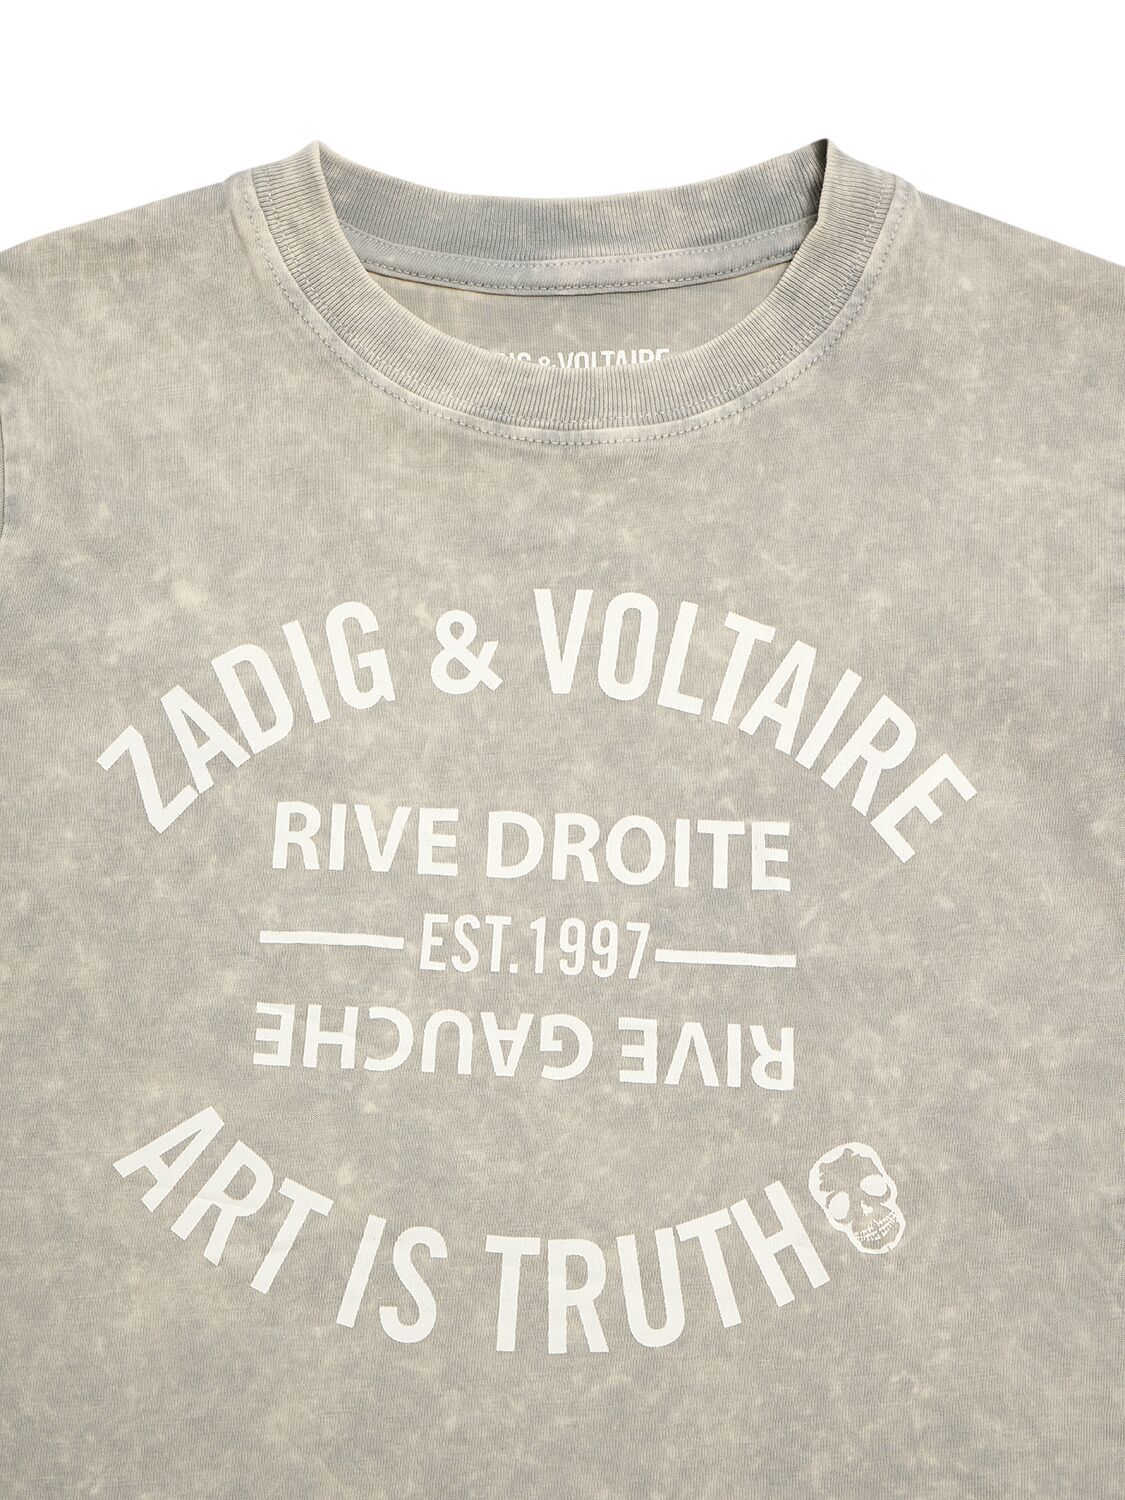 Shop Zadig & Voltaire Printed Organic Cotton T-shirt In Grey